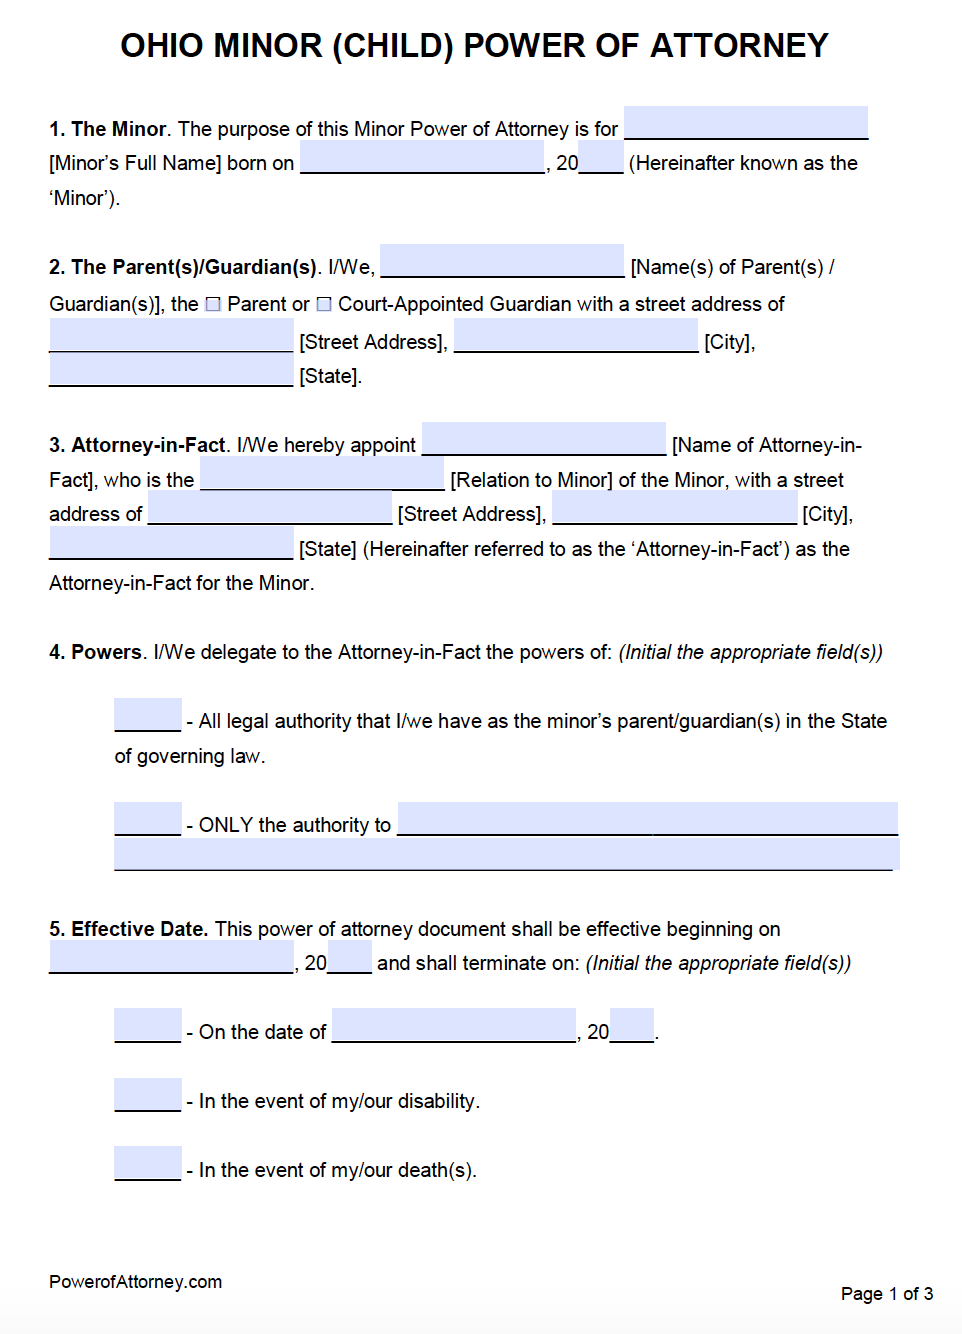 power of attorney form ohio for child
 Free Minor (Child) Power of Attorney Ohio – Adobe PDF